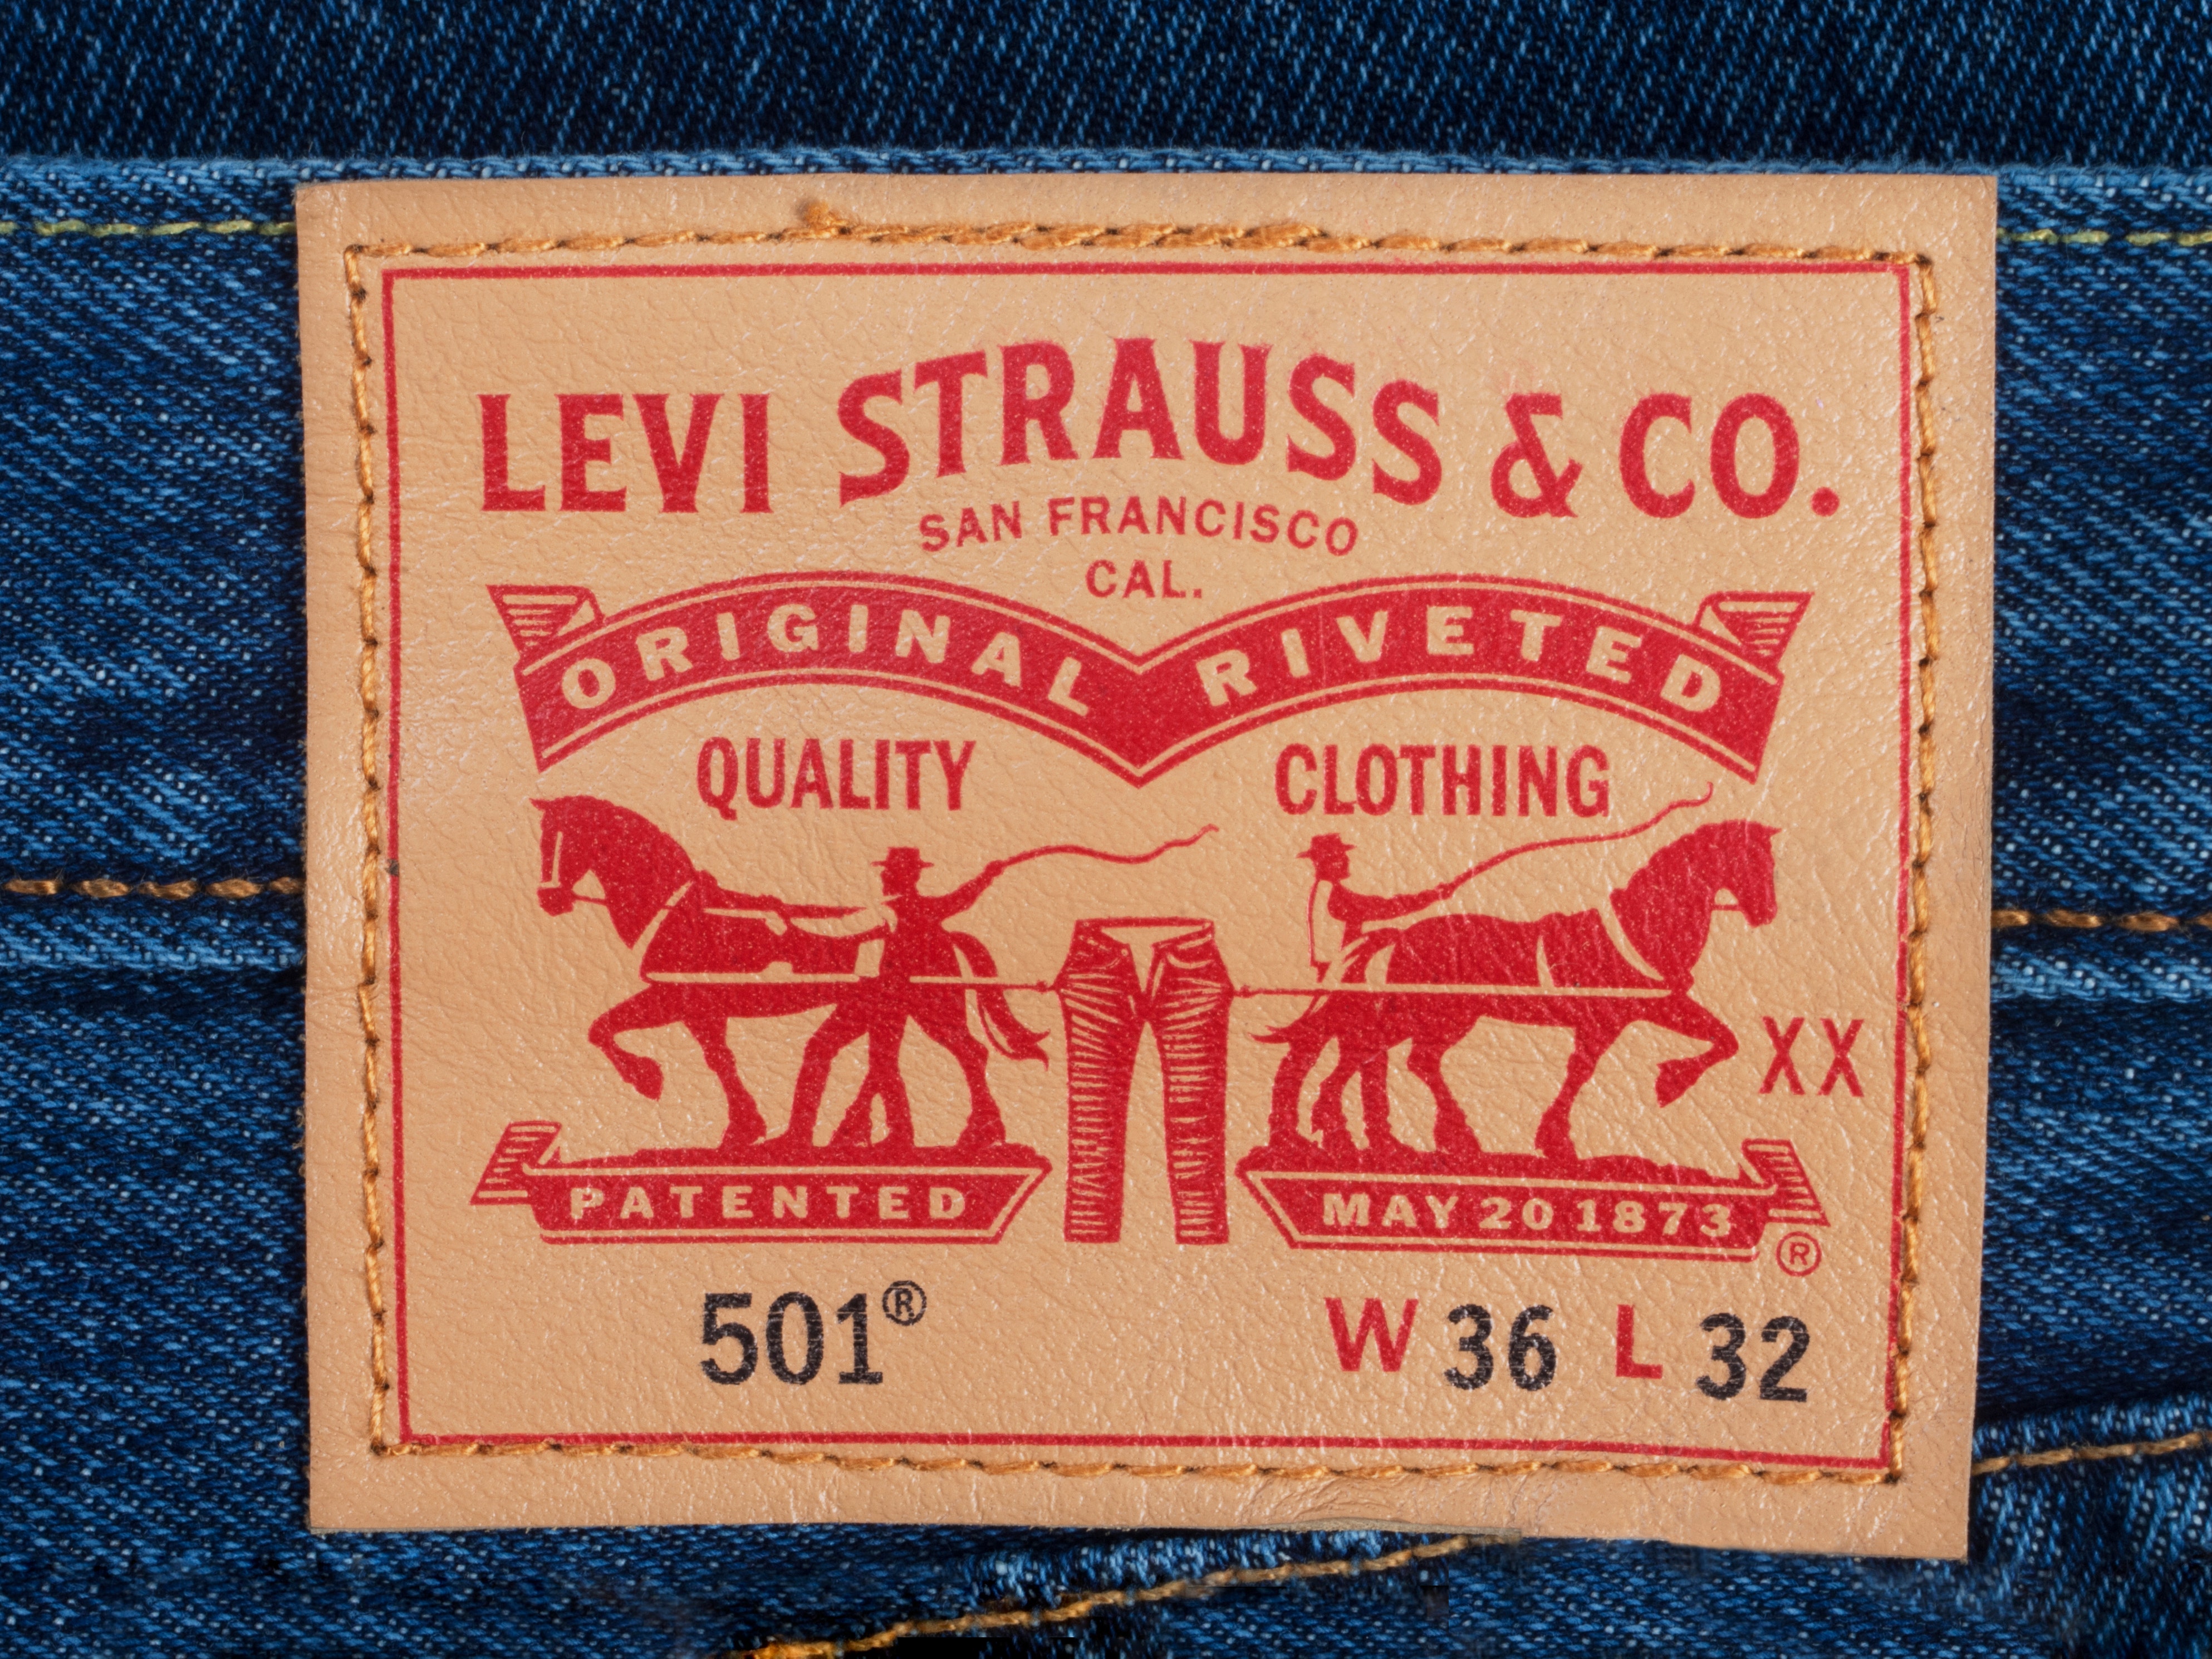 Levi Strauss Stock: A Great Buy While The Market Isn't Looking